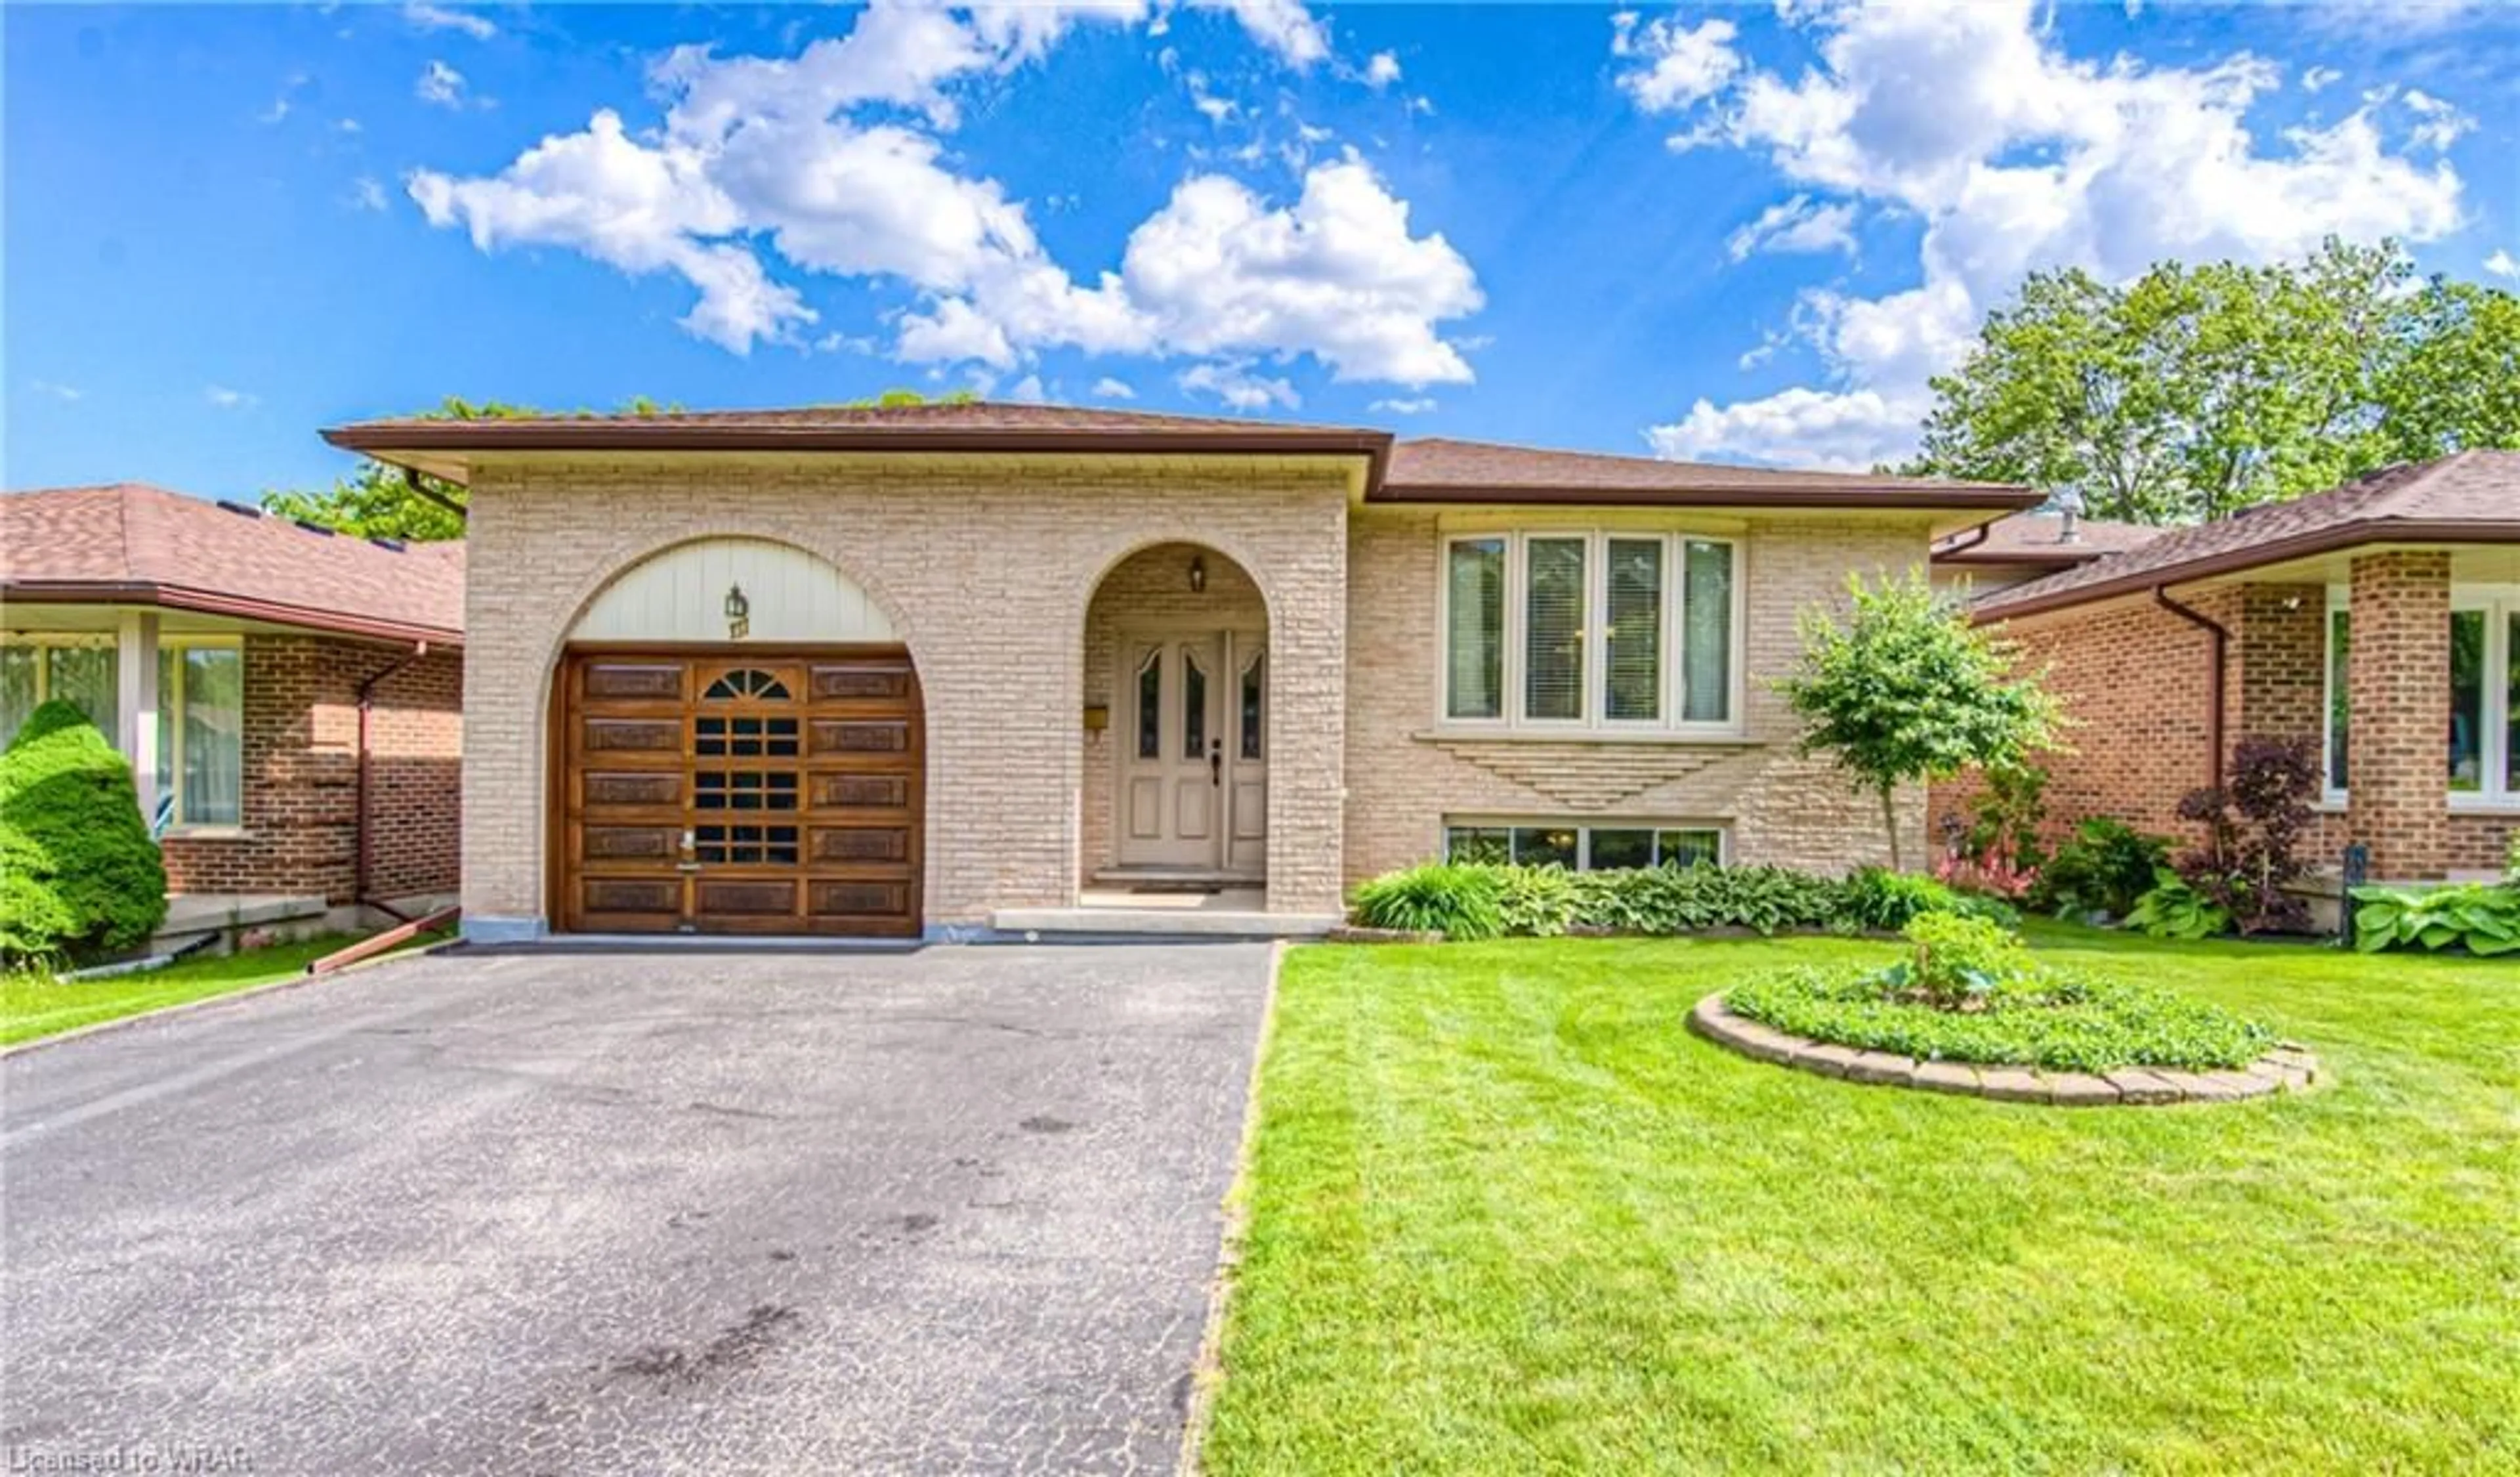 Home with brick exterior material for 111 Carlyle Dr, Kitchener Ontario N2P 1V9